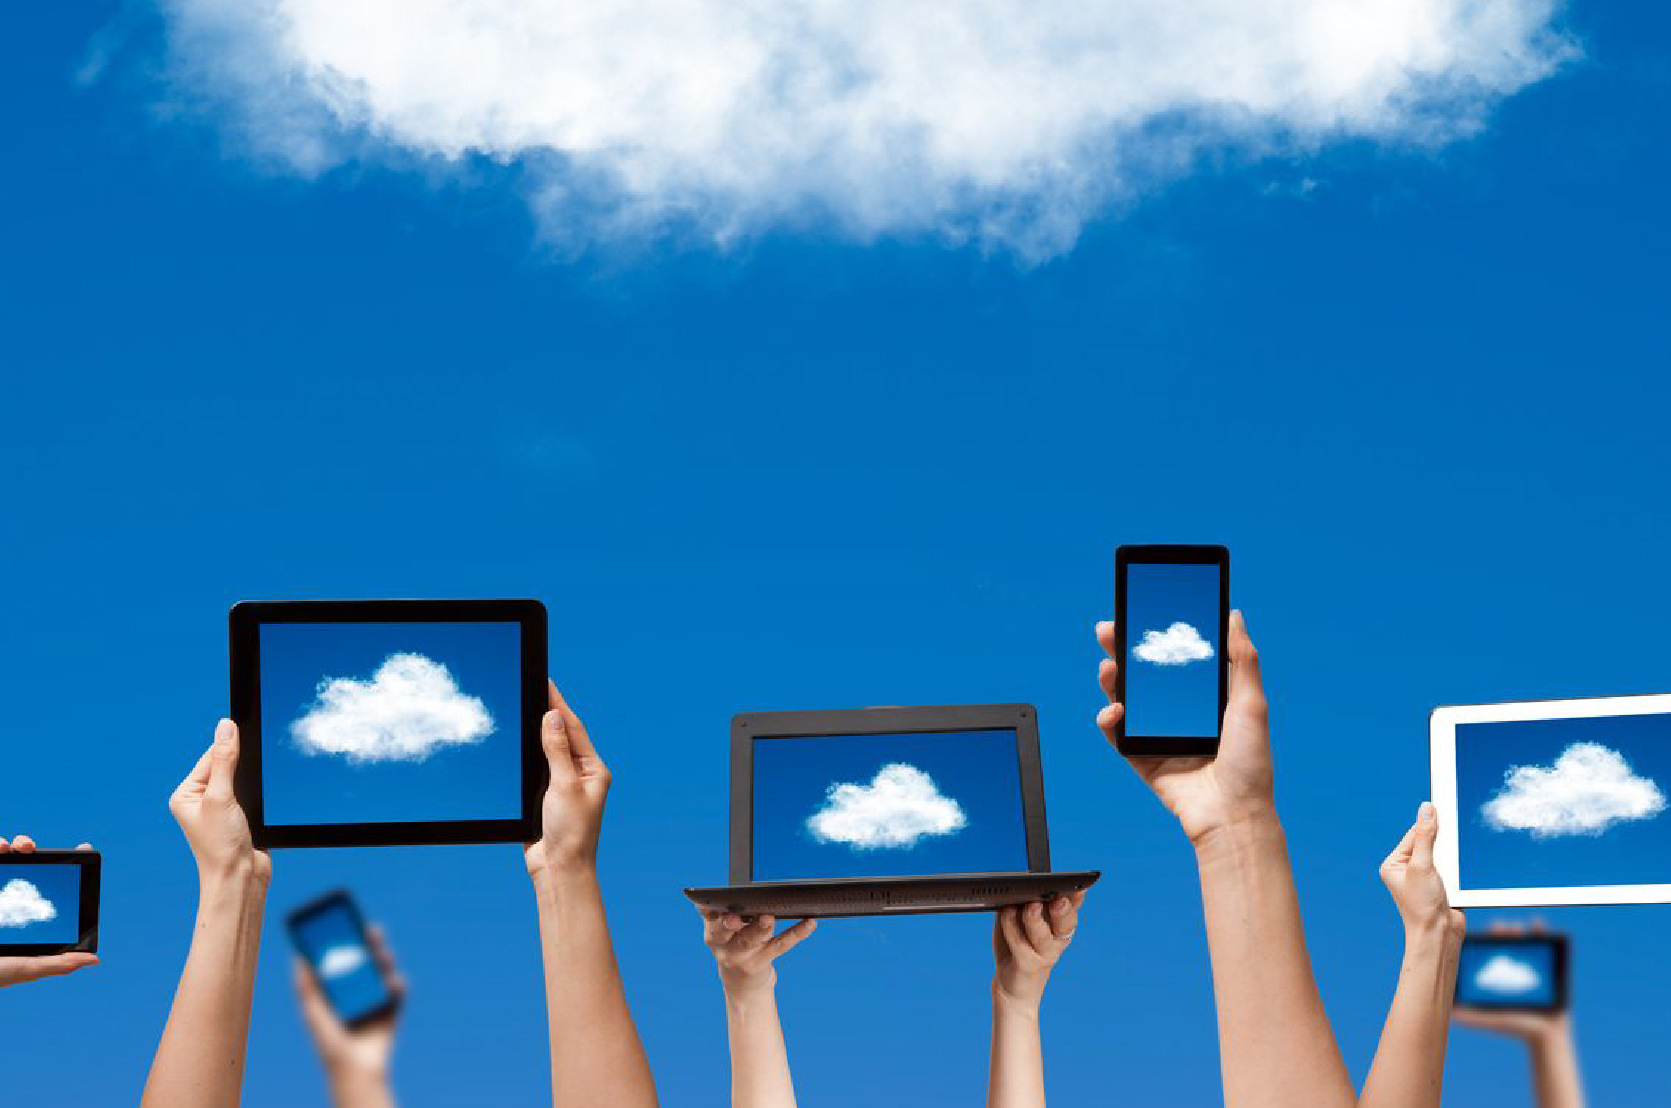 Different devices being held in the air. Each device screen displays the same image of a single cloud.